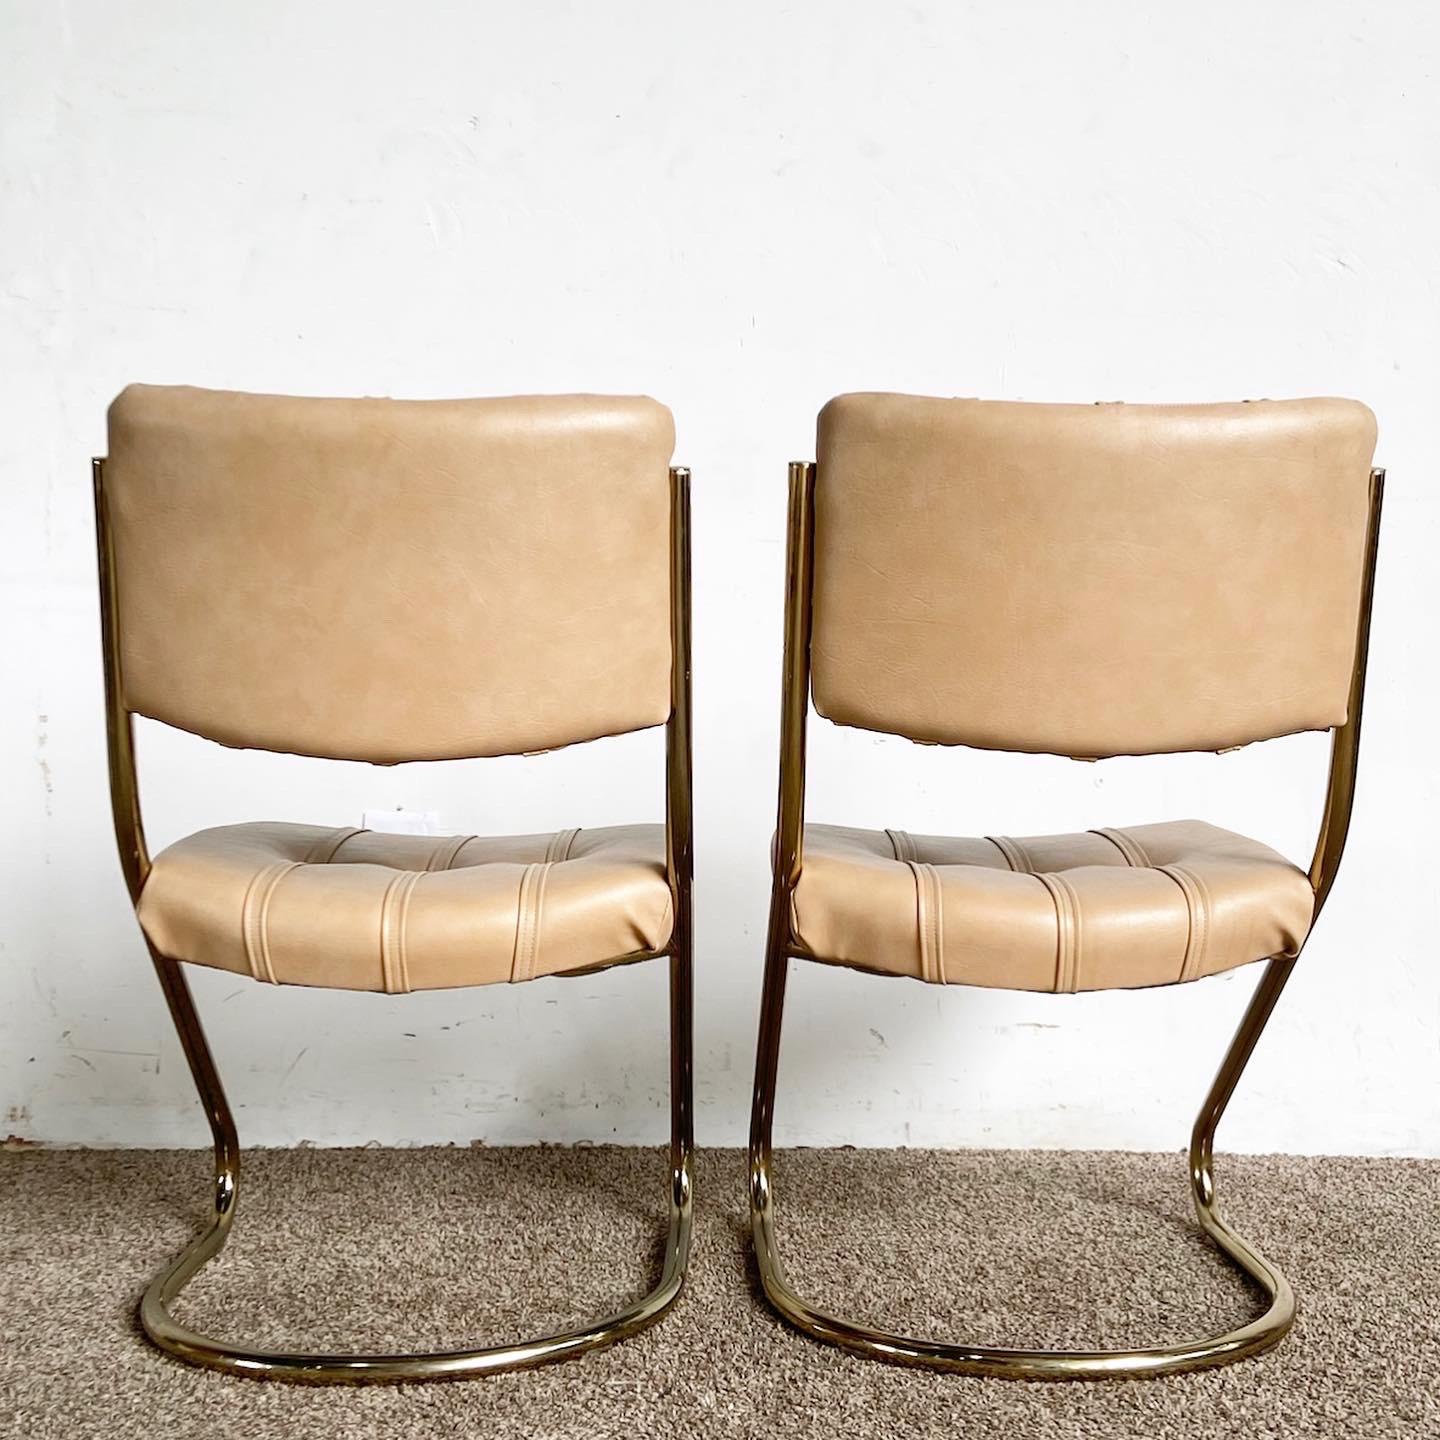 Mid Century Modern Gold and Tan Tufted Cantilever Chairs by Chromcraft - a Pair In Good Condition For Sale In Delray Beach, FL